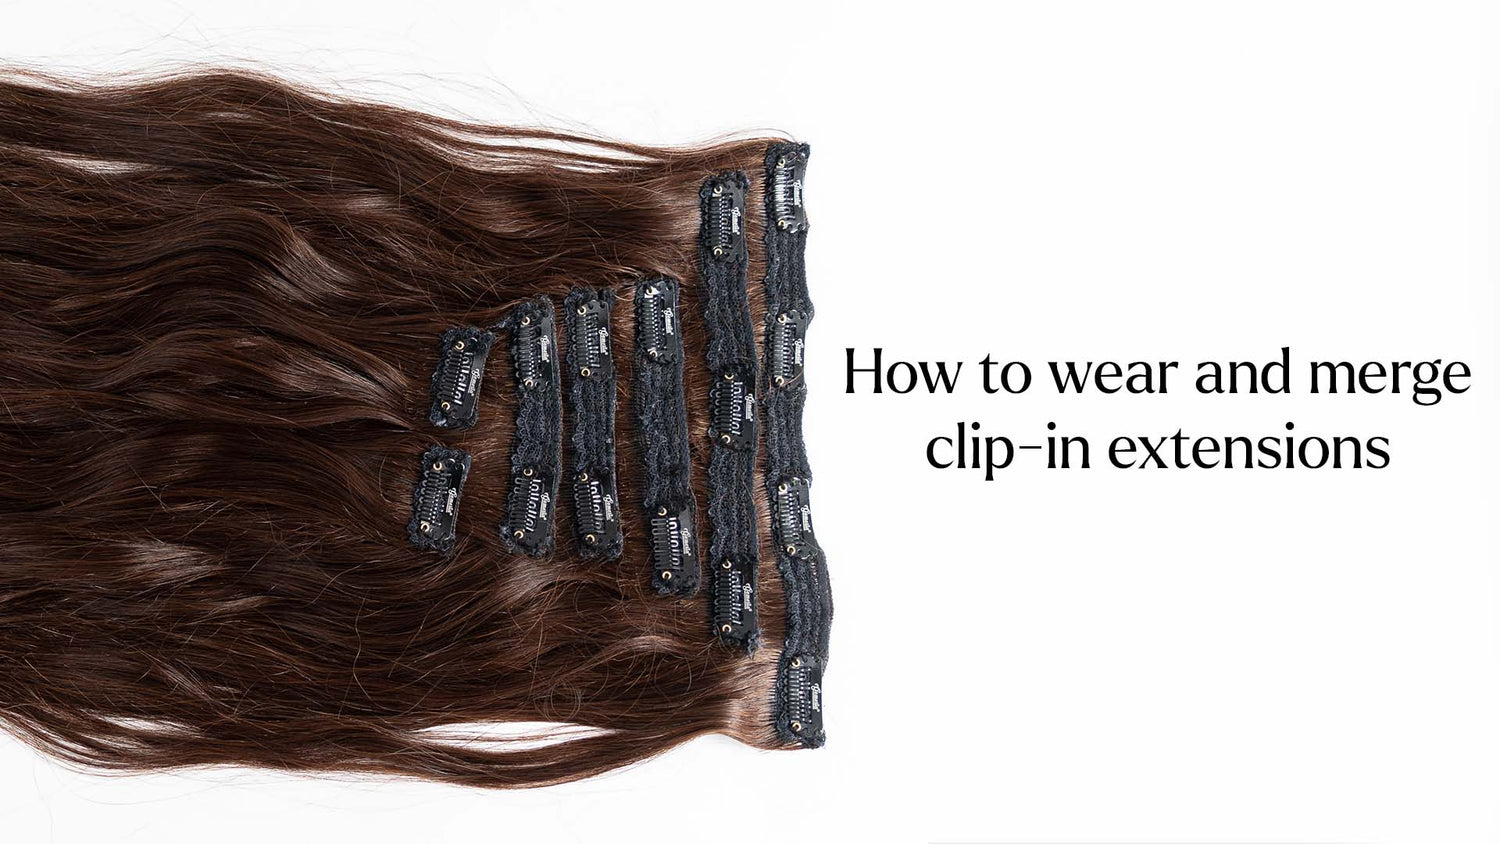 How to wear and merge clip-in extensions